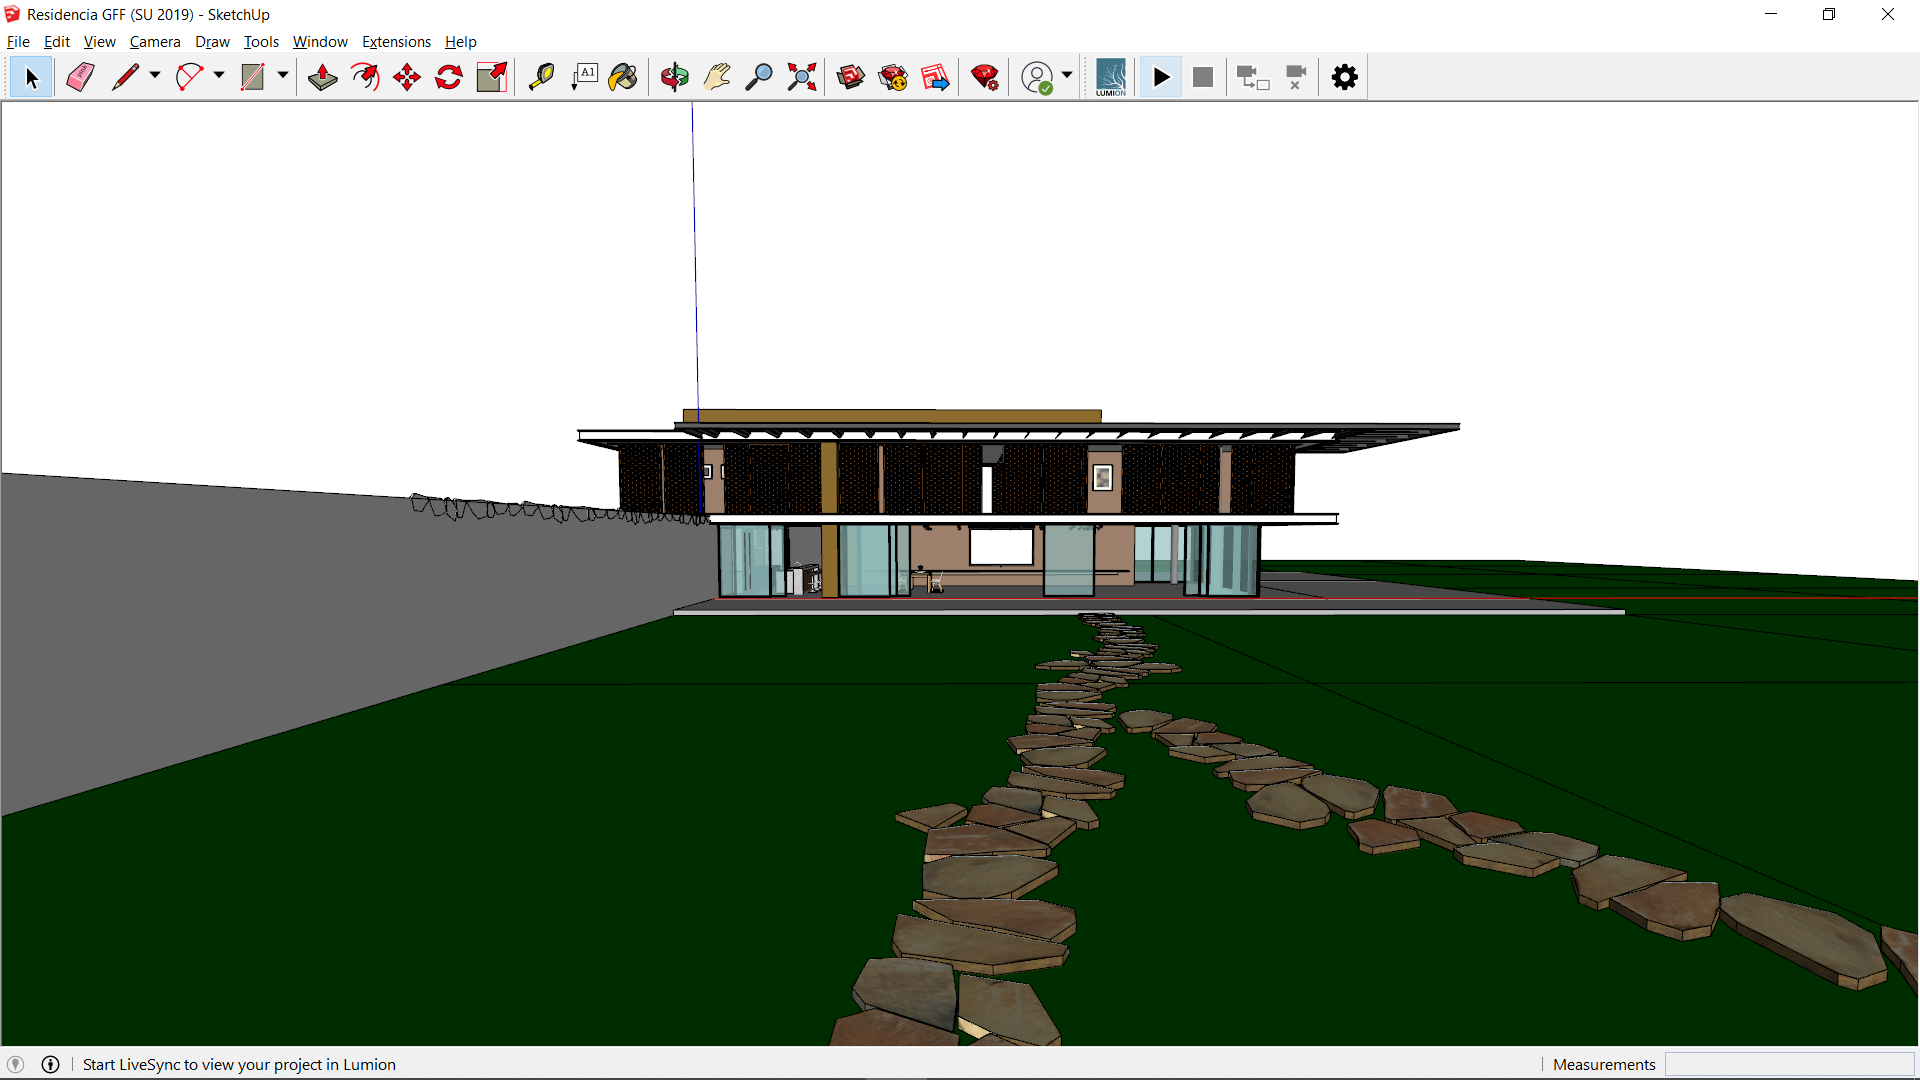 Residential Home Design in SketchUp